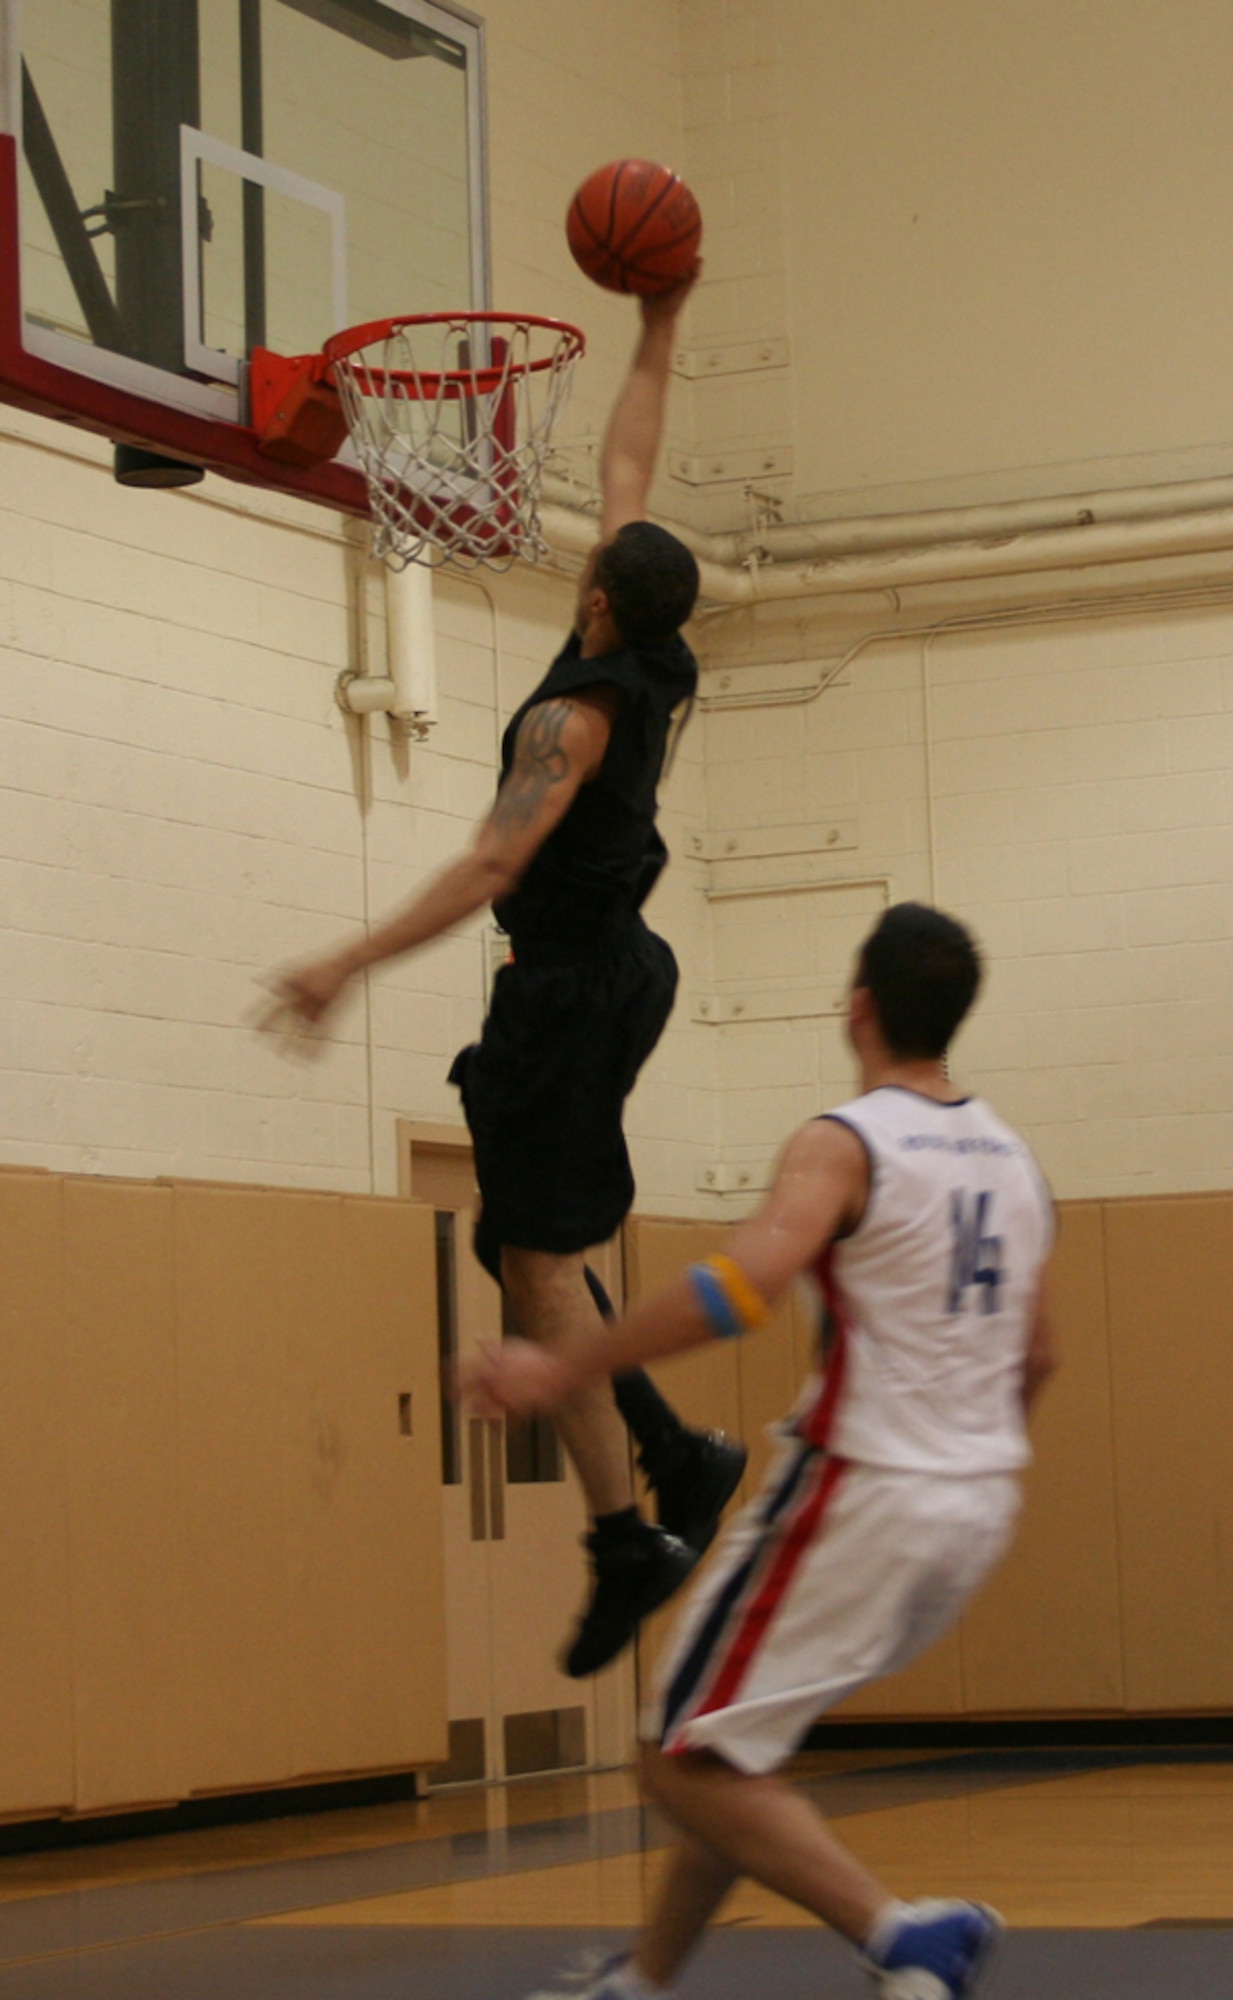 A Commando goes for a dunk during their game against the Royal Air Force Feb. 22. (U.S. Air Force photo by Jamie Haig)